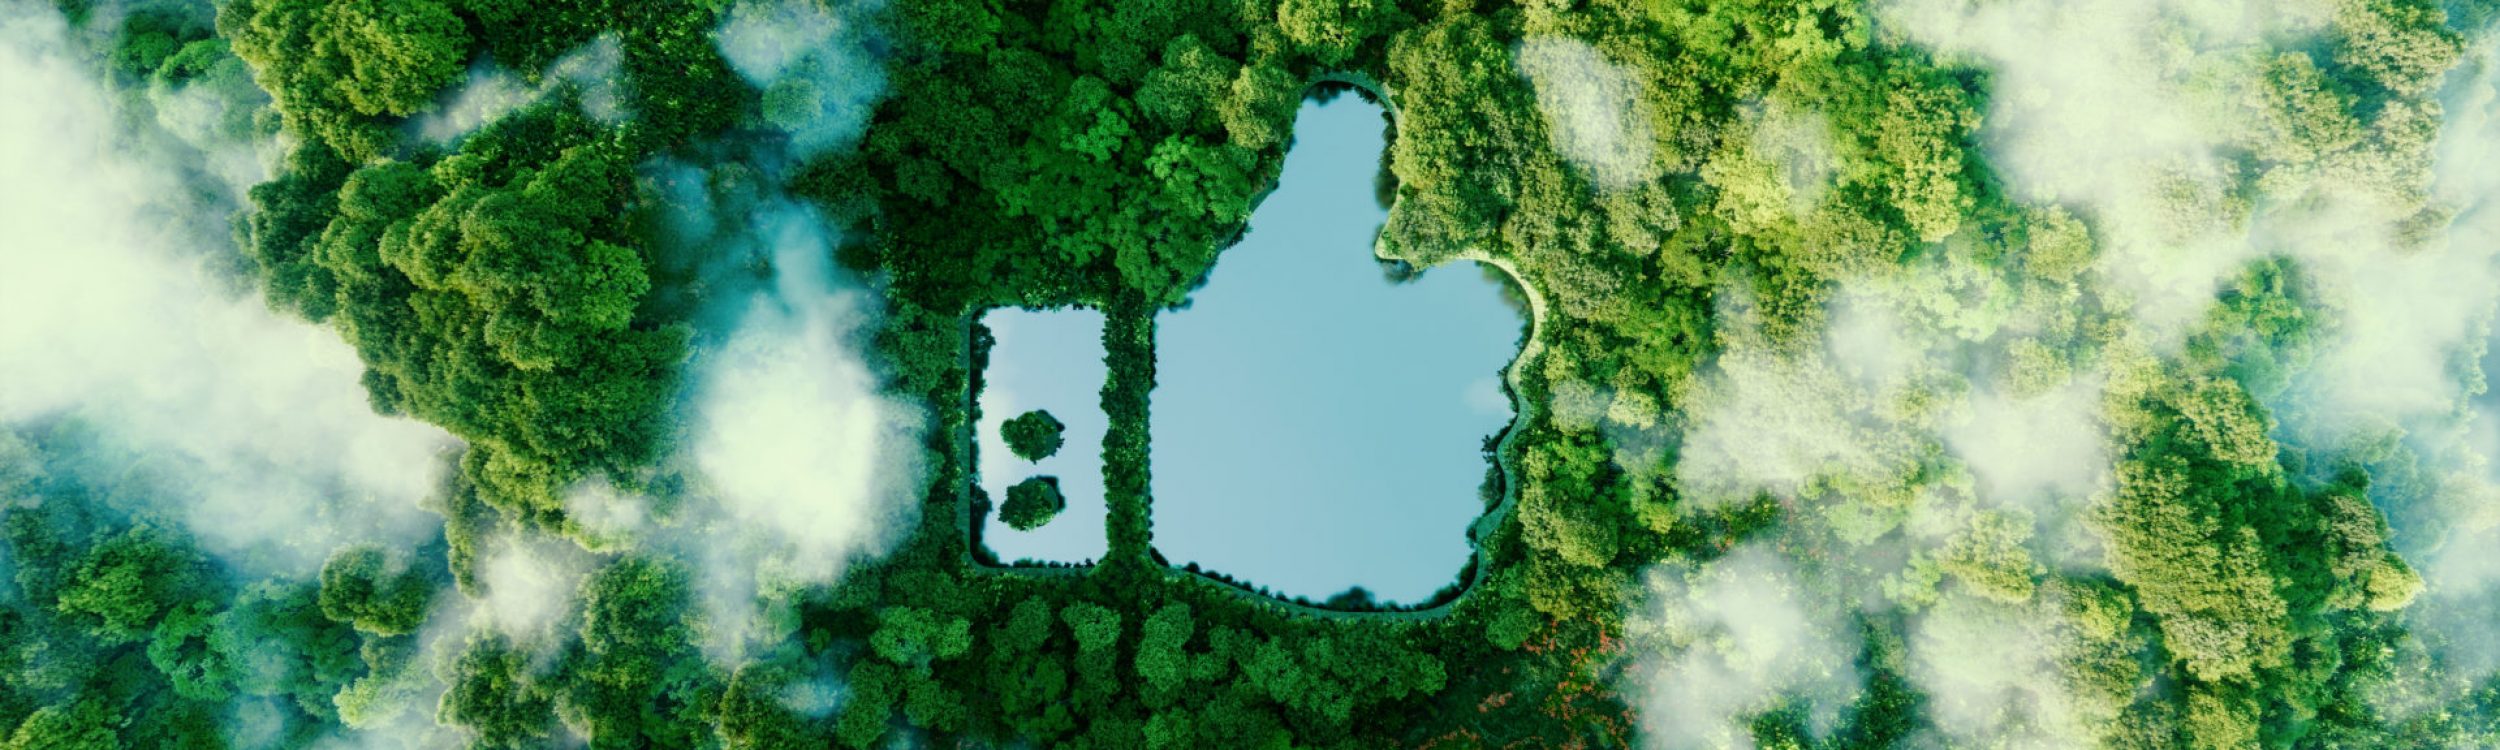 Thumbs up icon - like icon in the form of a clear pond in the middle of a lush virgin forest. 3d rendering.